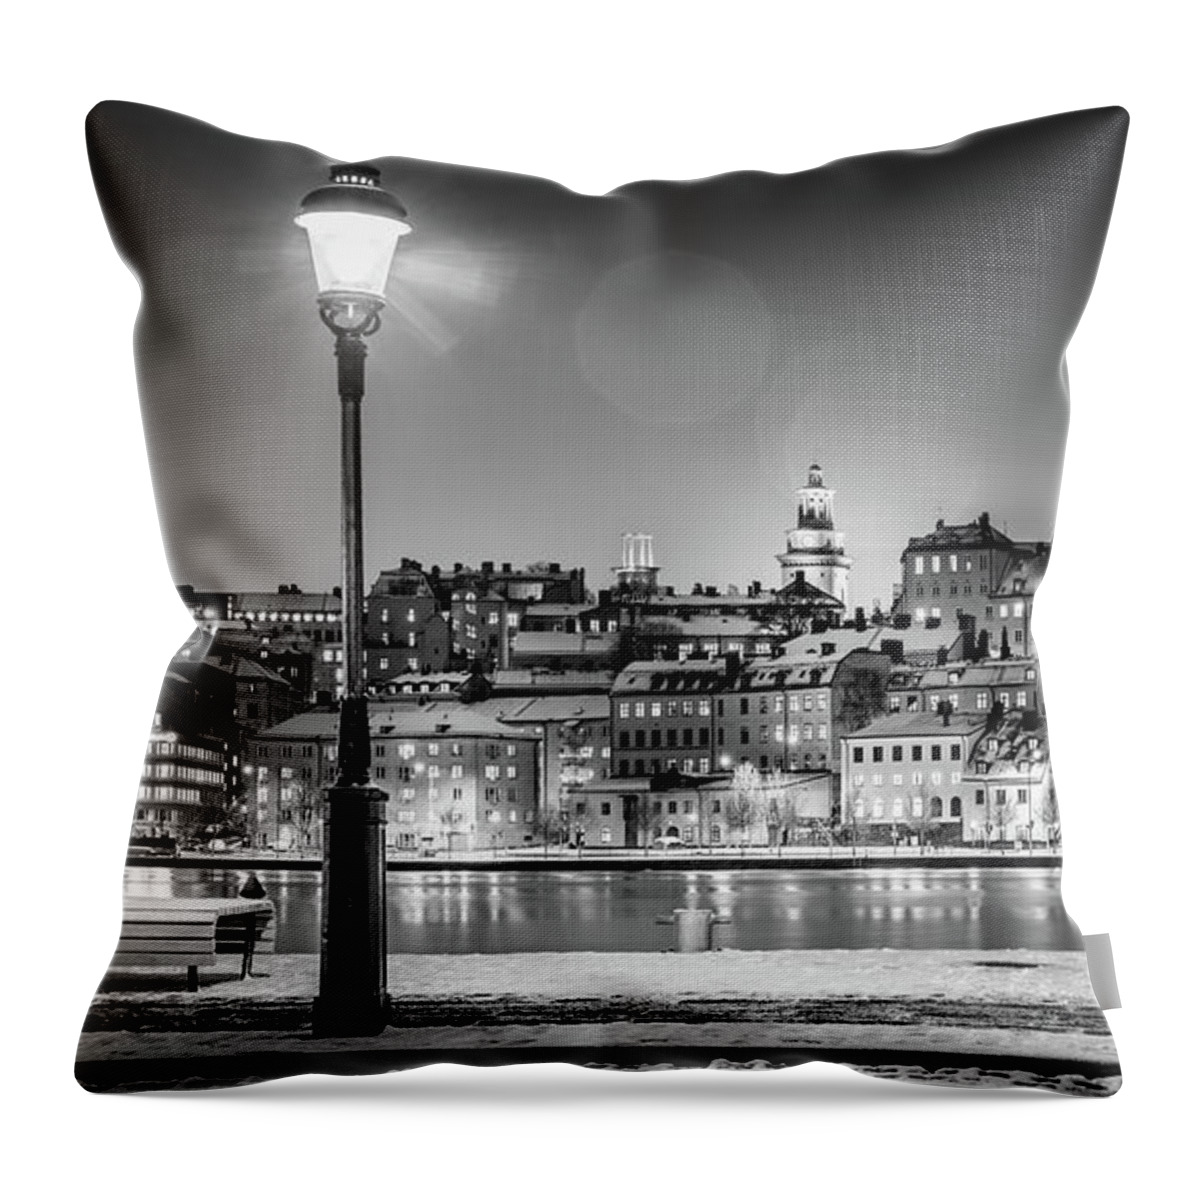 Stockholm Throw Pillow featuring the photograph View of Stockholm by Nicklas Gustafsson